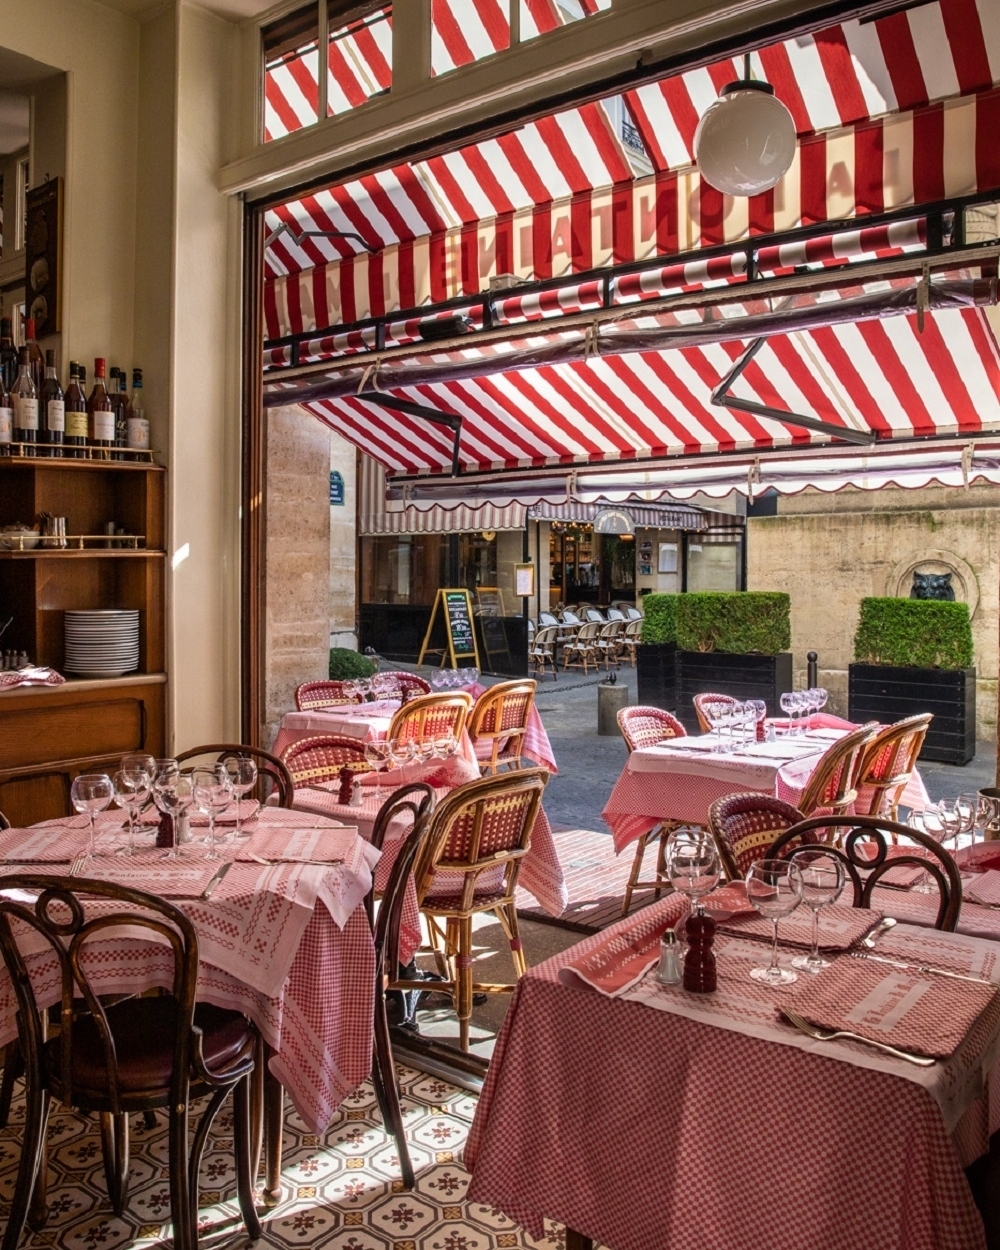 Checkered red table linens and red woven bistro chairs at La Fontaine de Mars